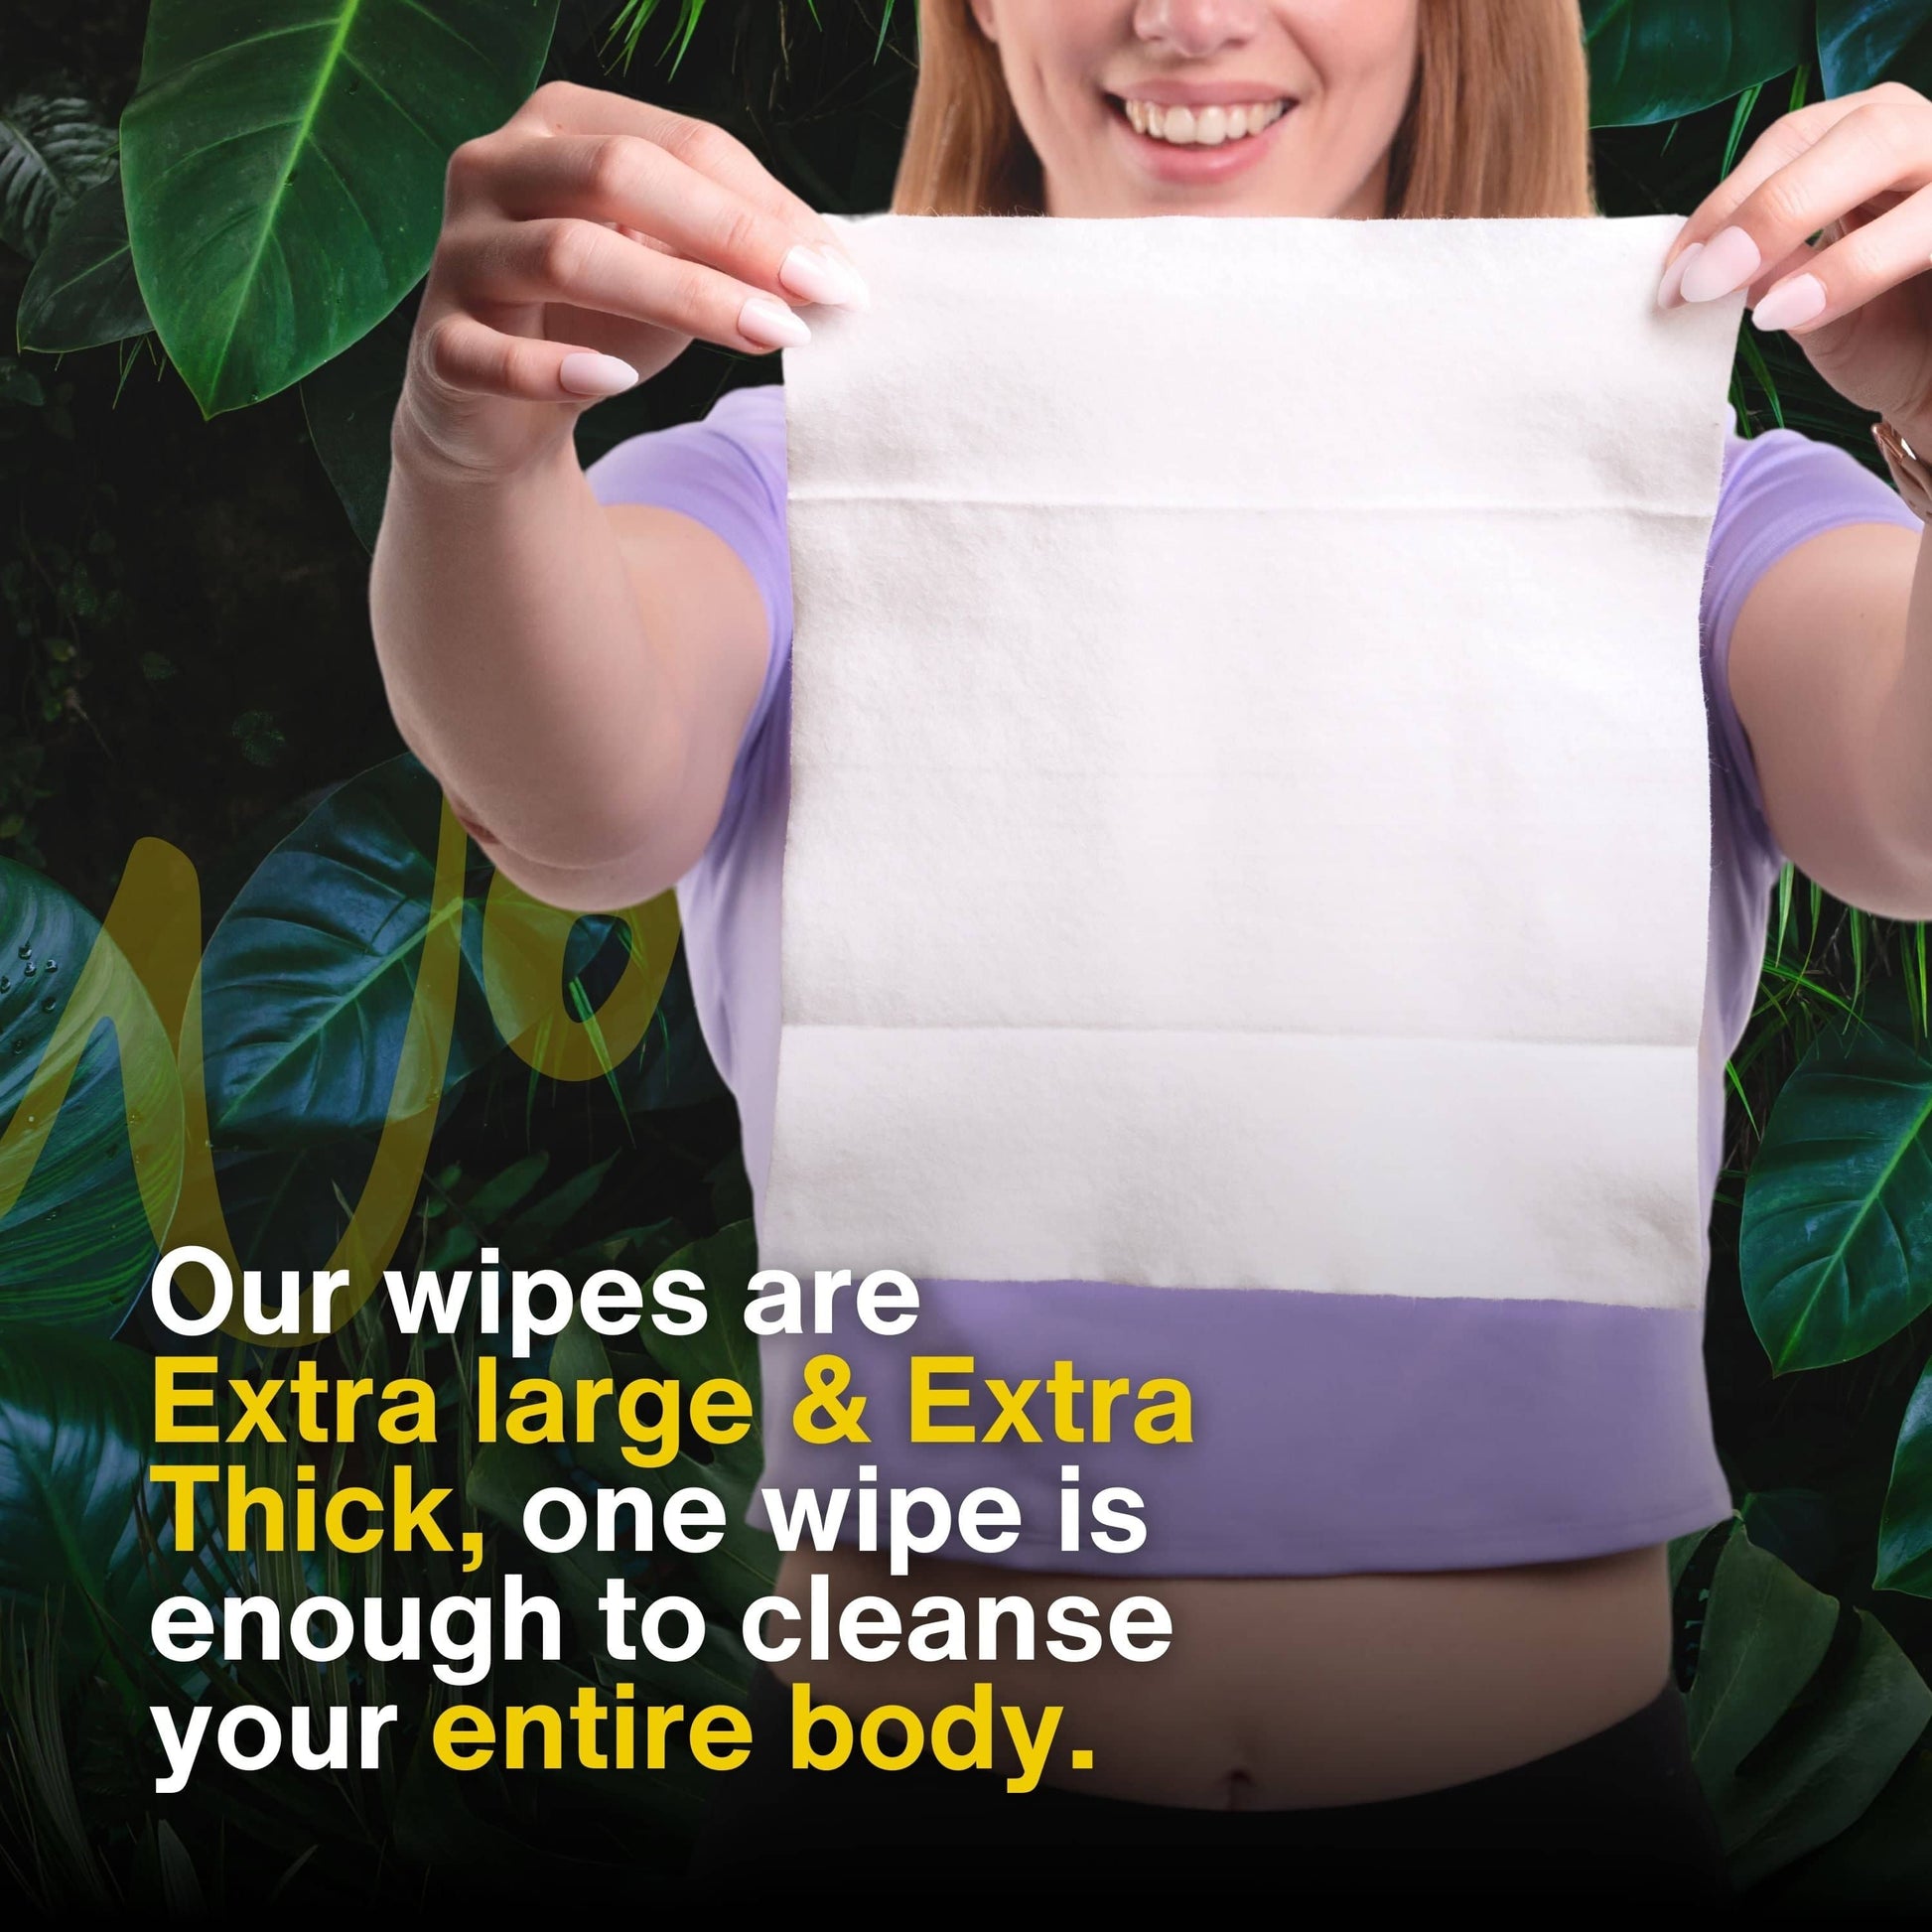 Work Out Wipes for Women